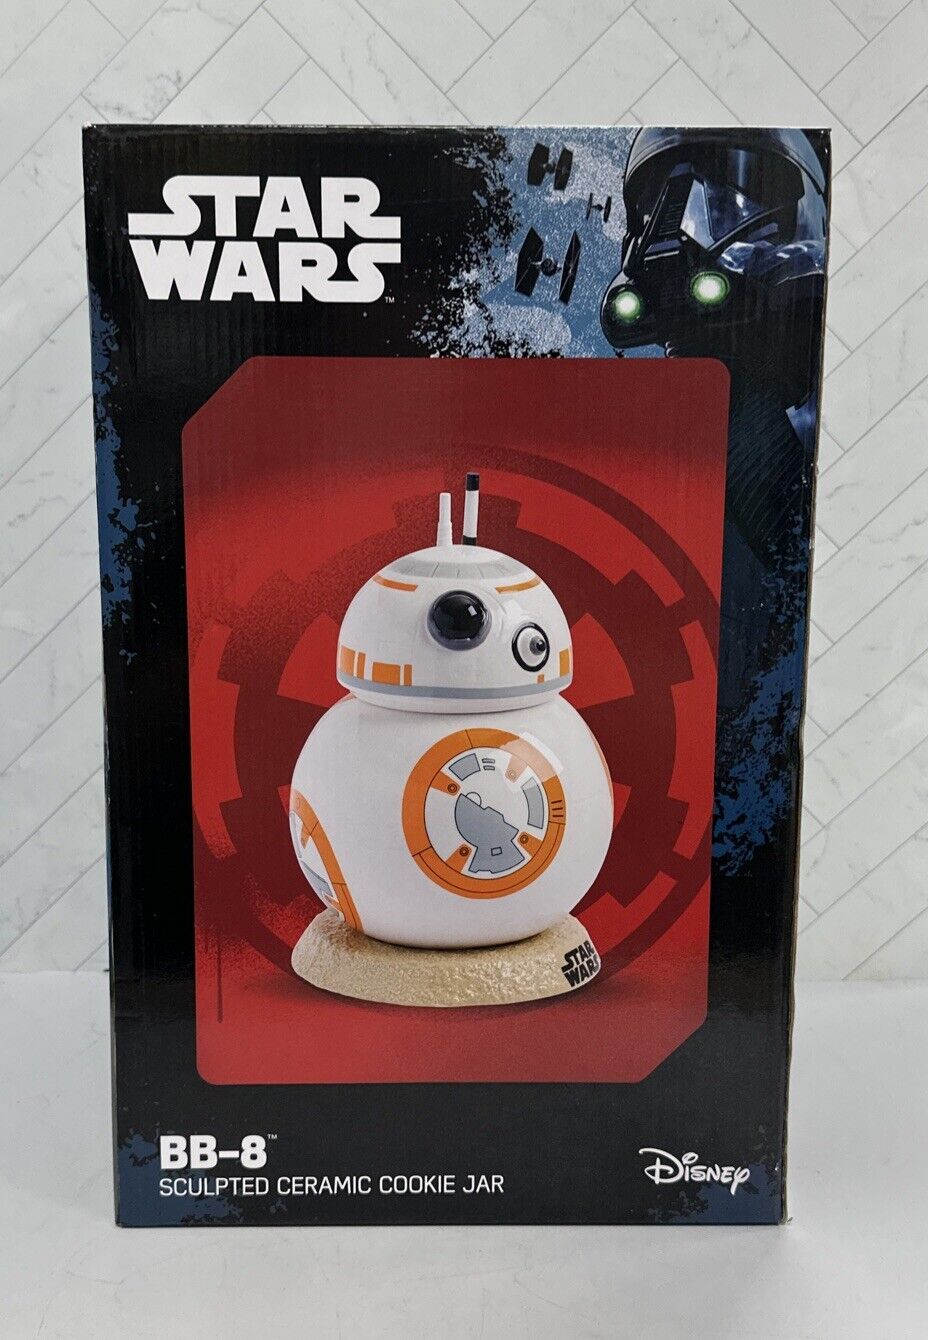 Star Wars BB8 Droid Ceramic Molded Shaped Cookie Jar in Box